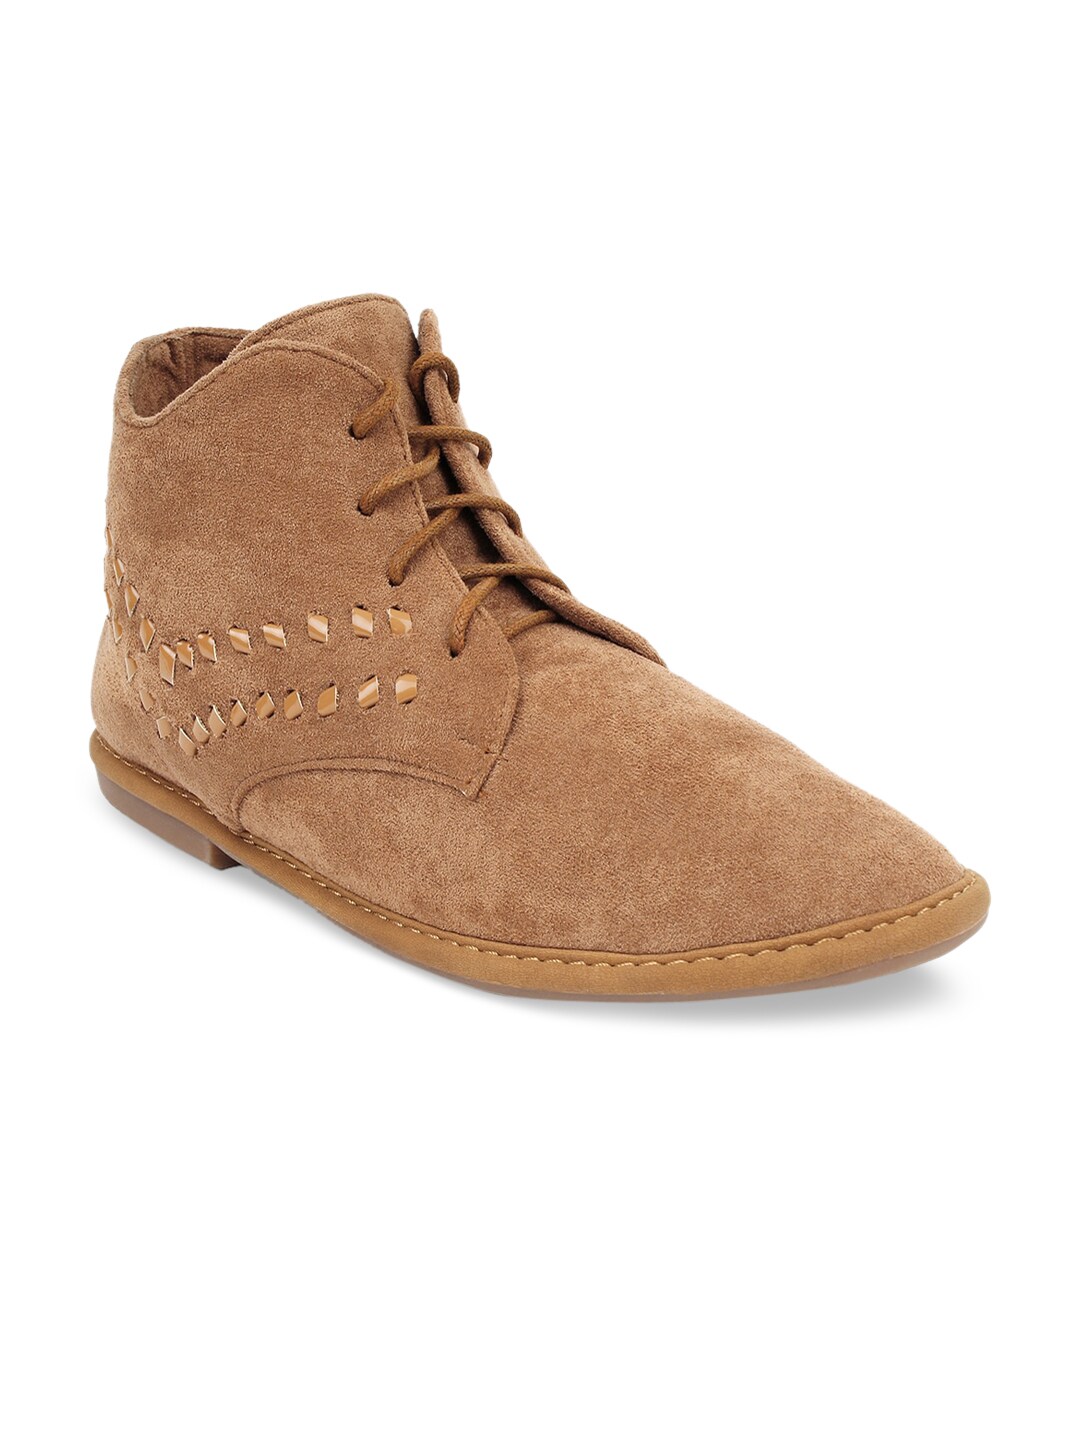 MSC Women Beige Solid Synthetic Suede Mid-Top Flat Boots Price in India